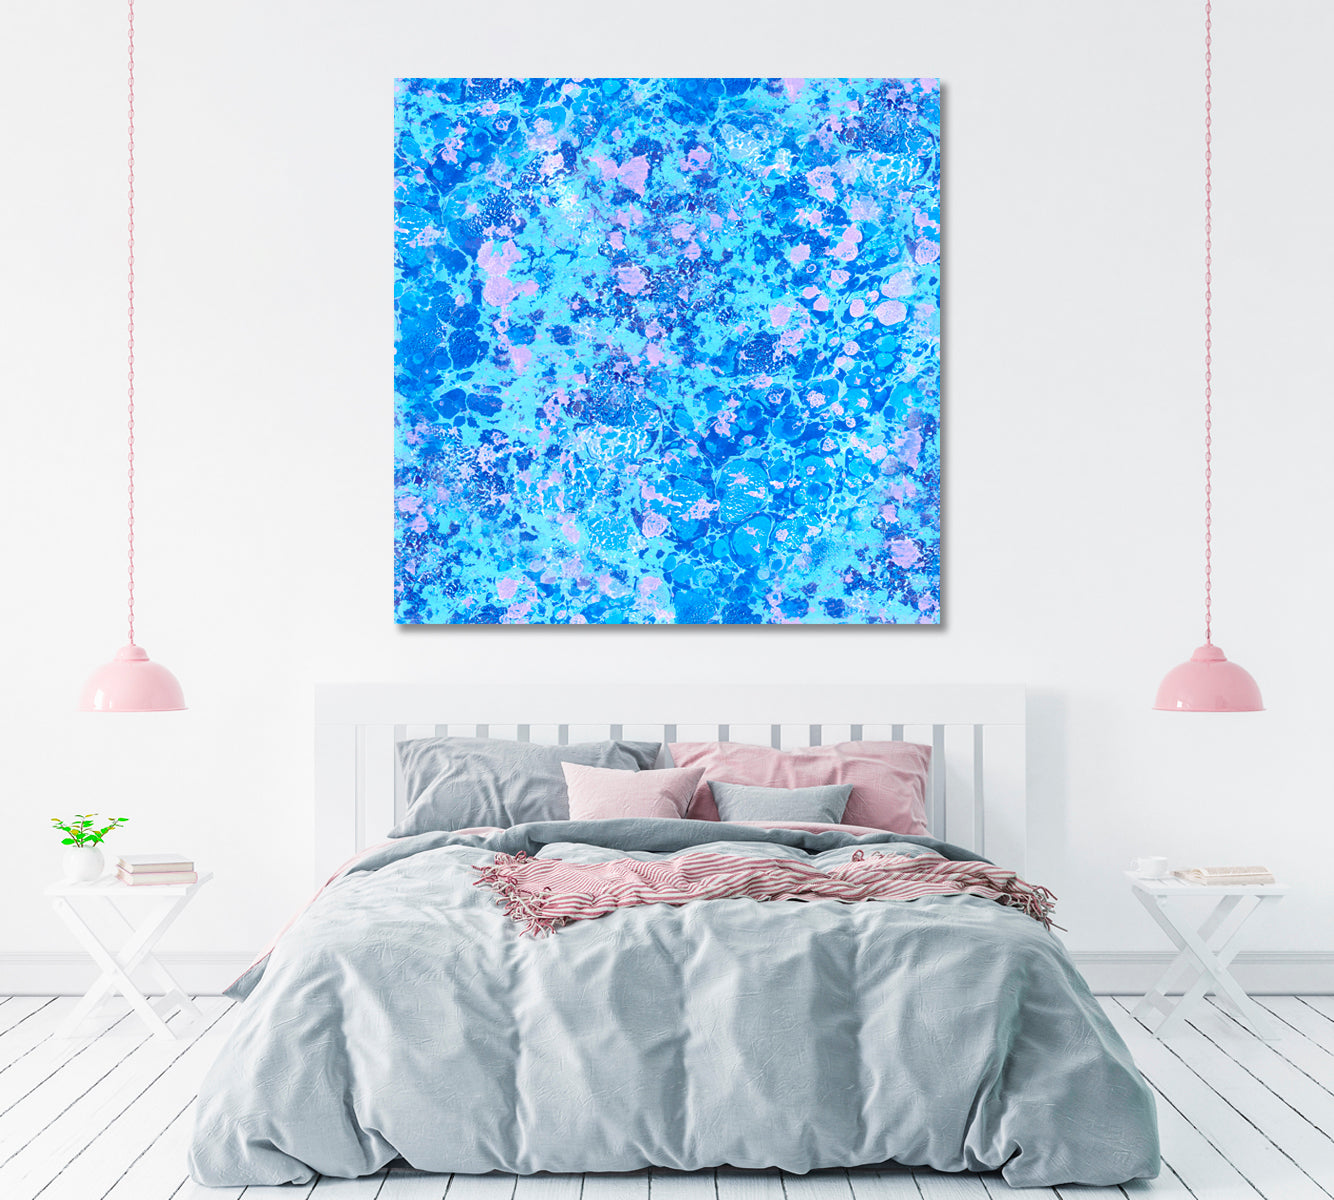 Abstract Blue Pattern Canvas Print ArtLexy 1 Panel 12"x12" inches 